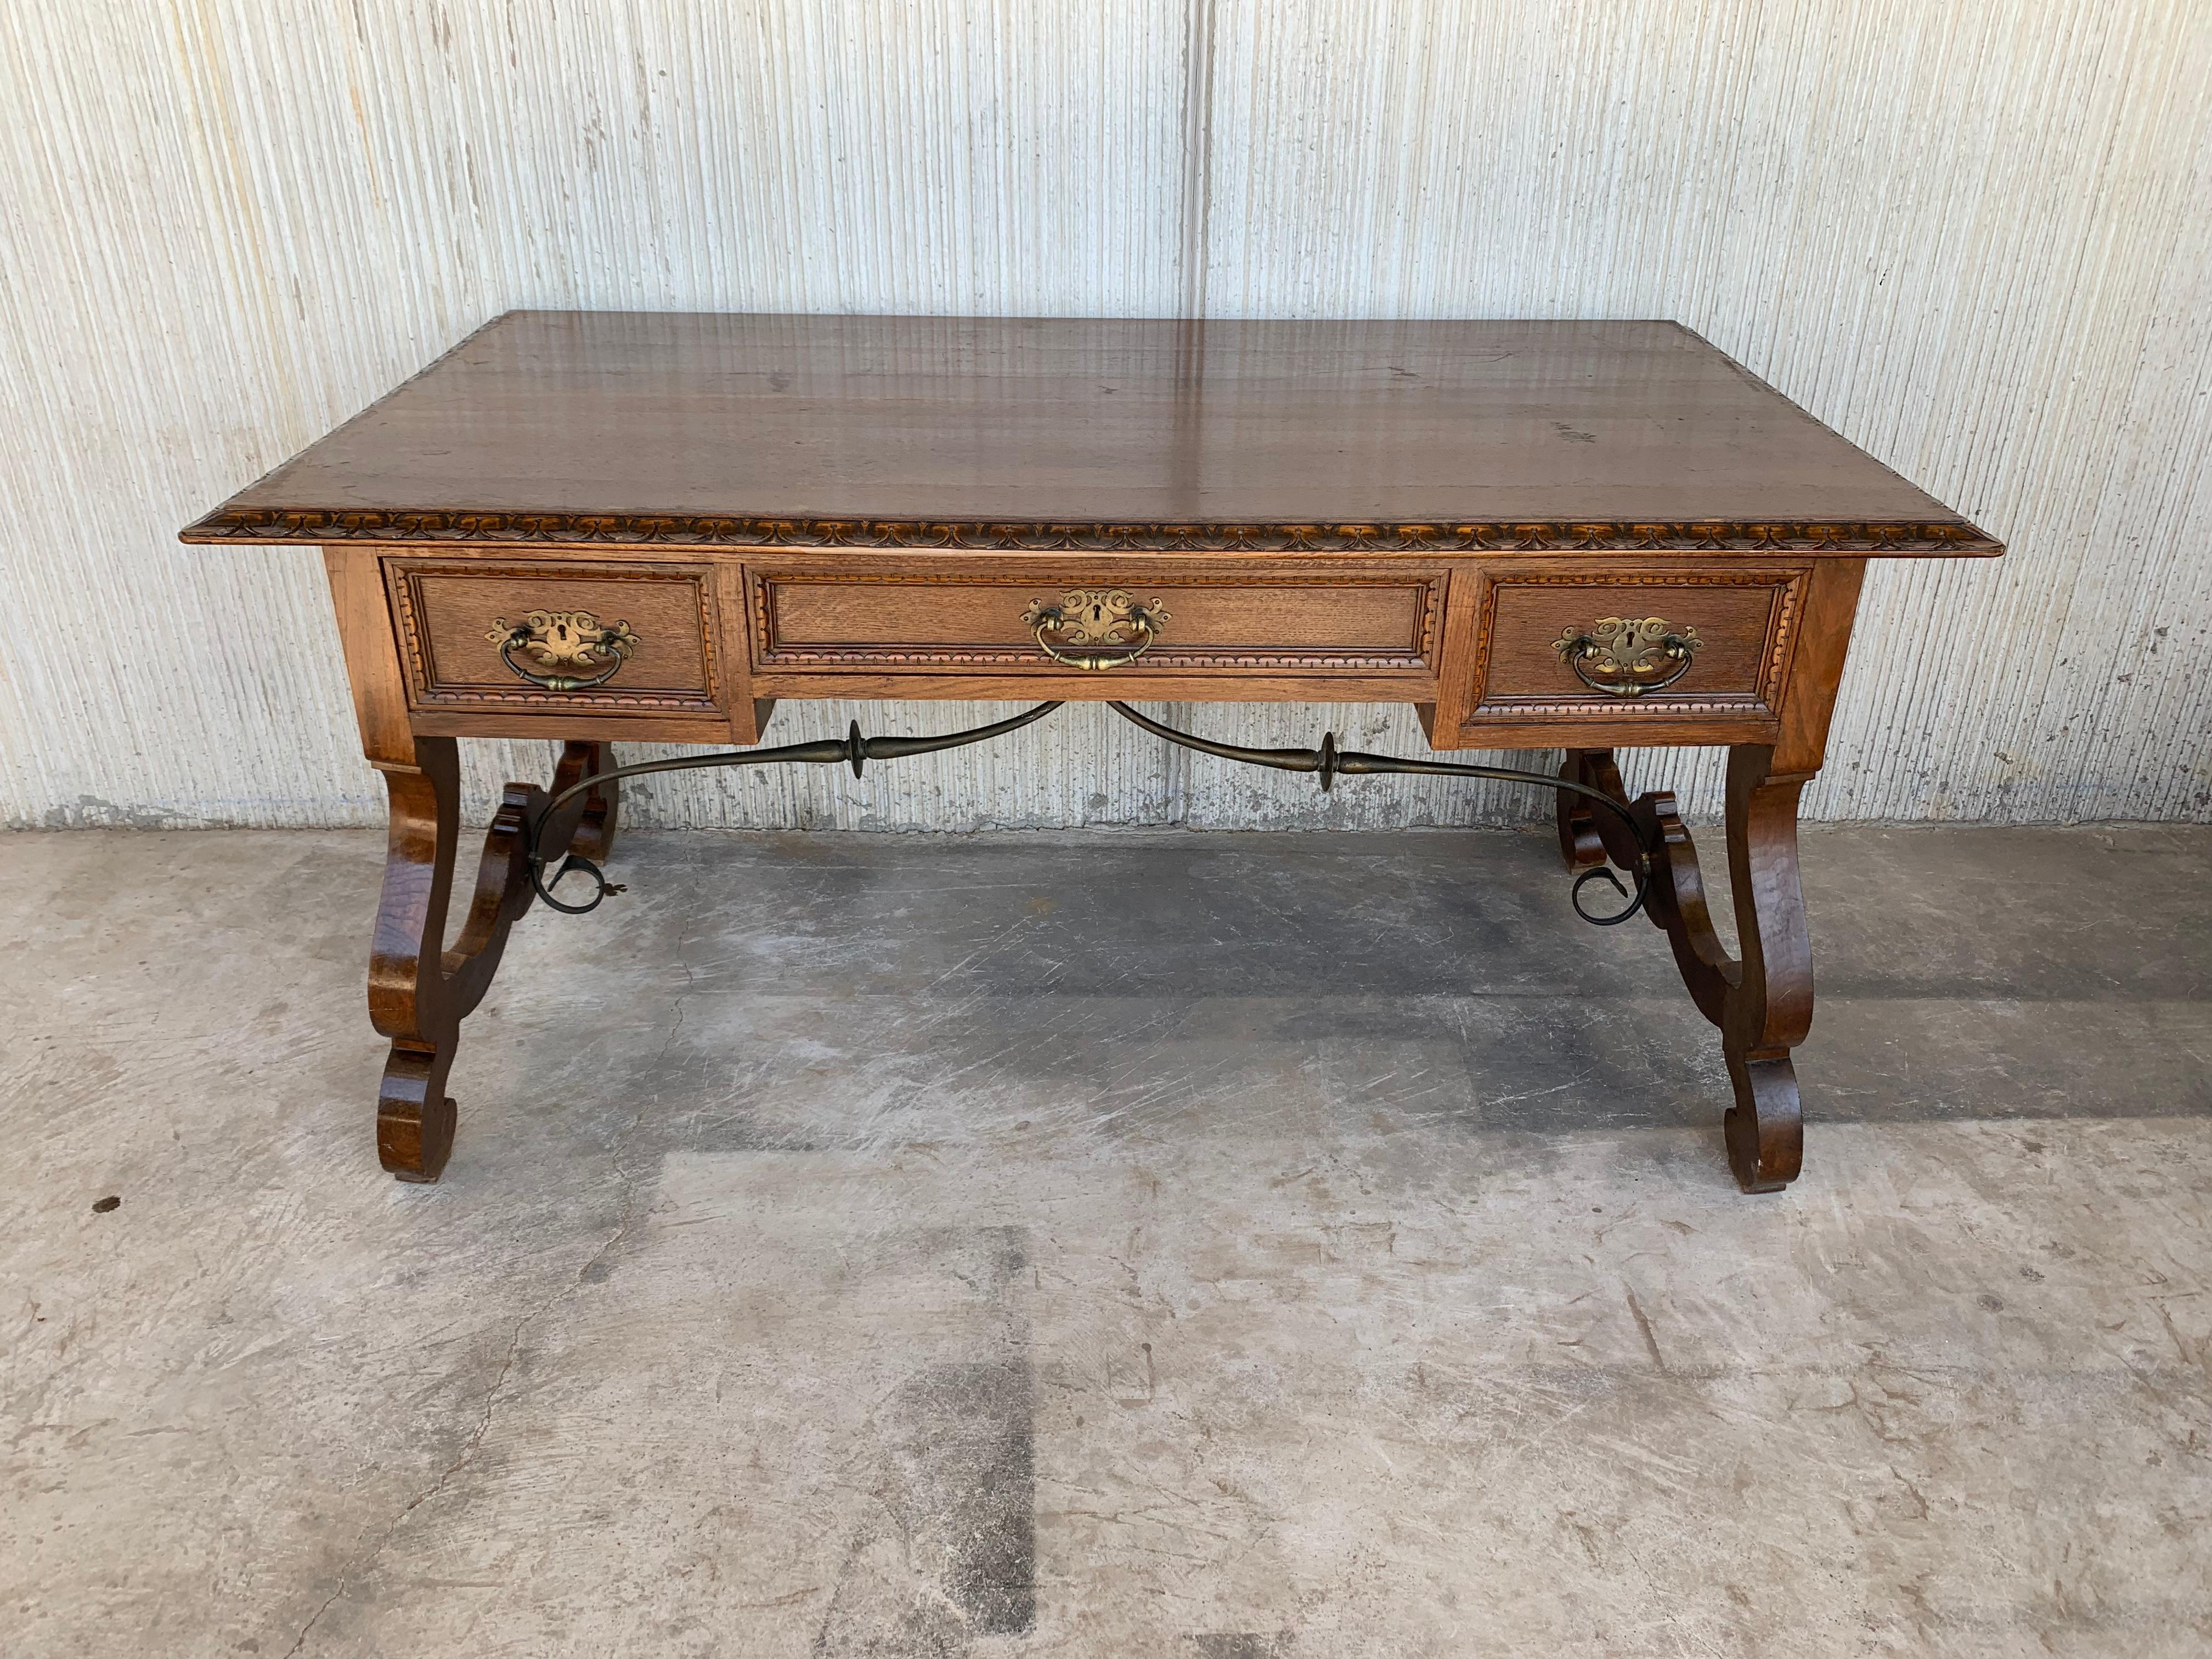 20th Century 20th Spanish Desk or Library Carved Oak Table with Three Drawers & Stretcher